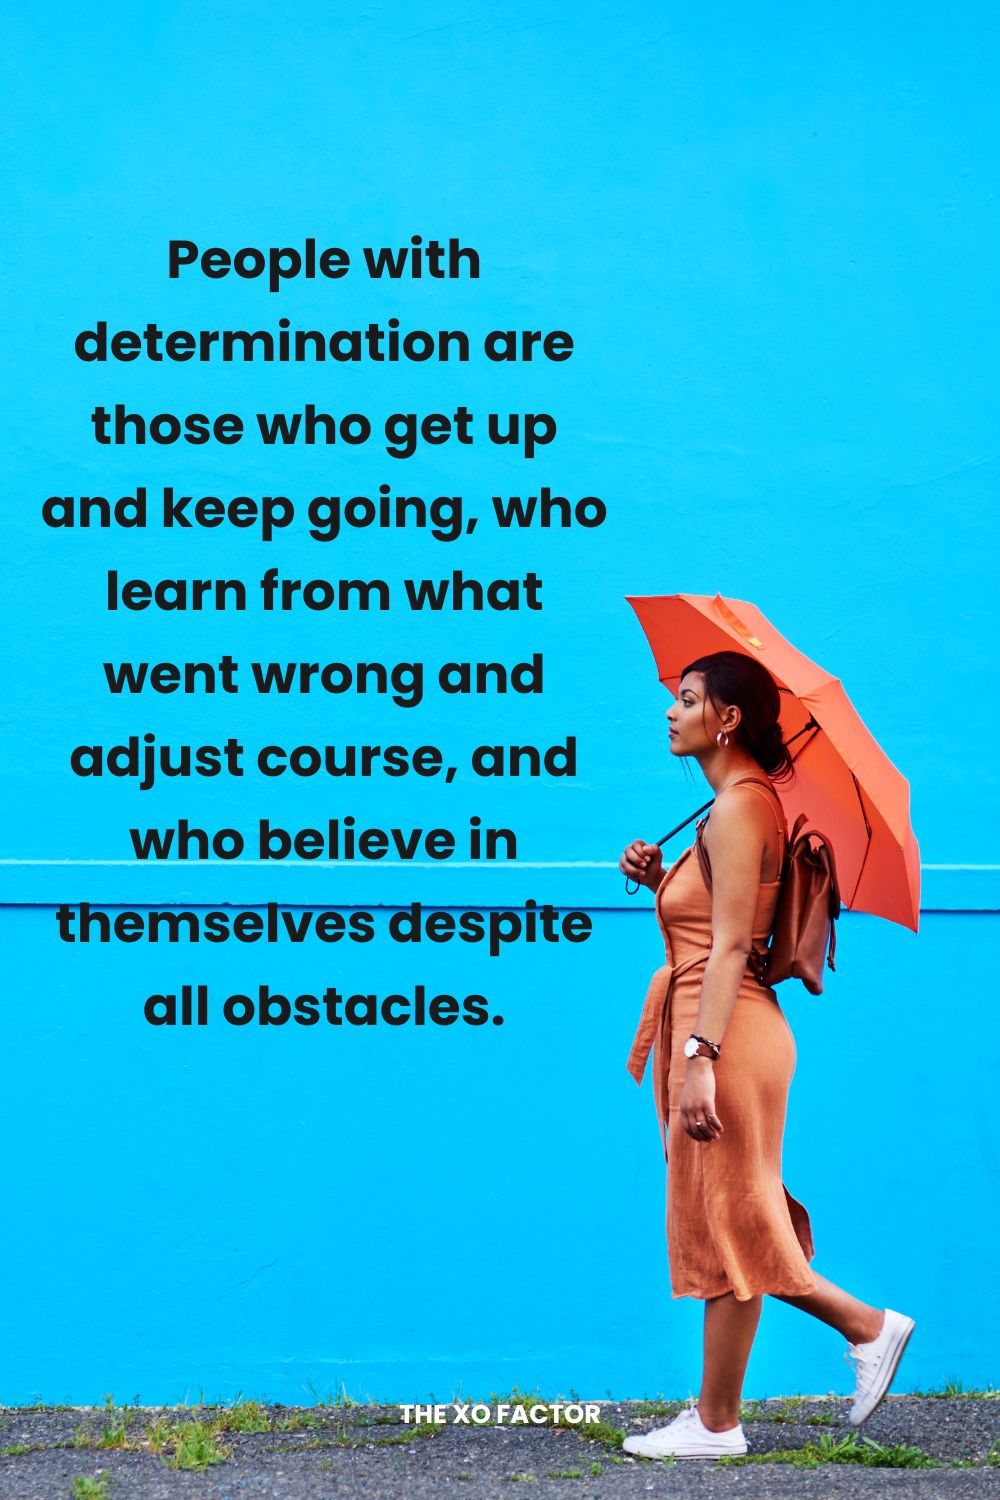 People with determination are those who get up and keep going, who learn from what went wrong and adjust course, and who believe in themselves despite all obstacles.